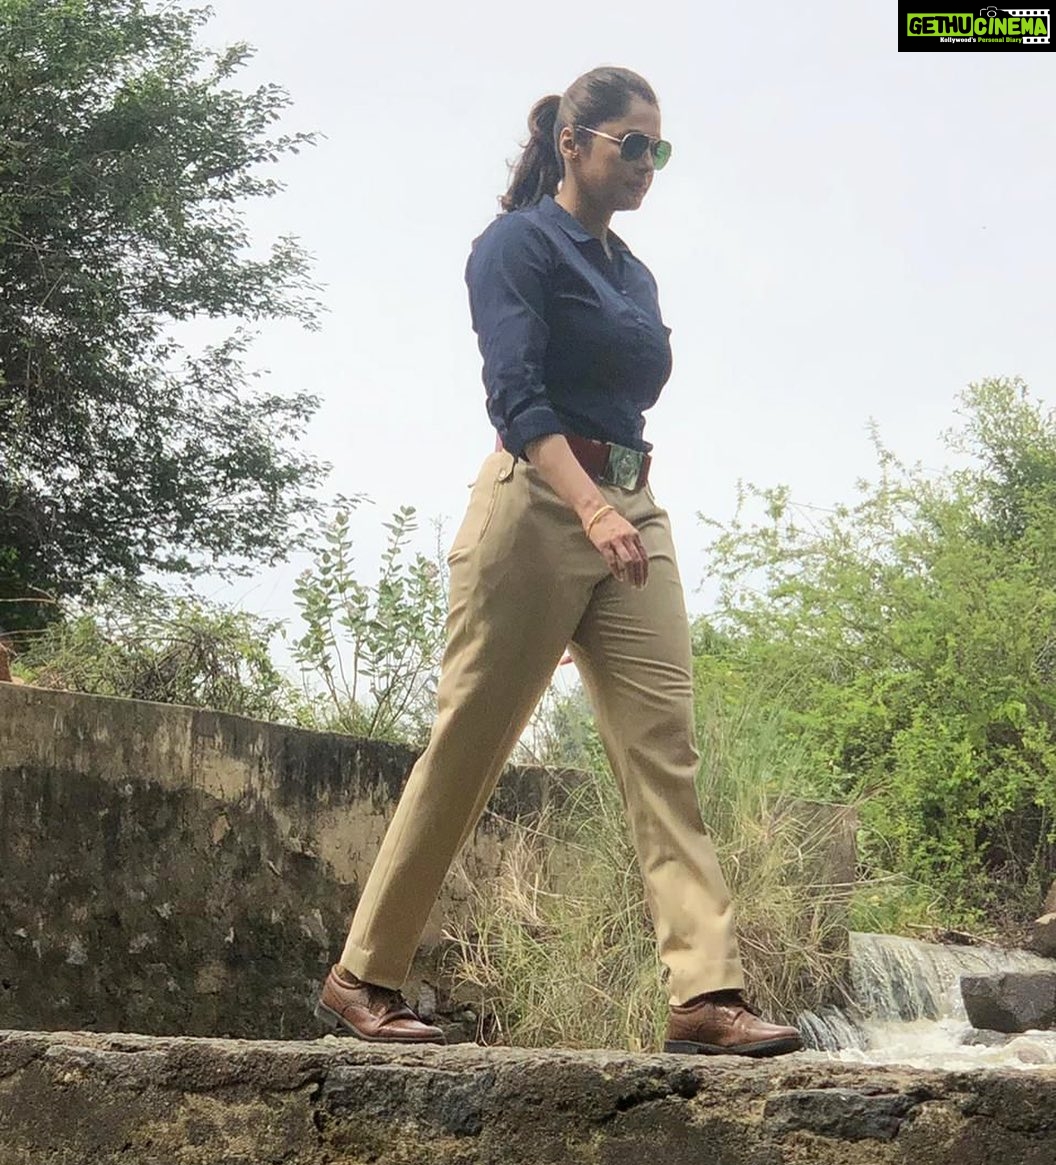 Isha Koppikar Instagram - Our morning walk is a trail through the mountains. Kids had such a great time walking in nature, away from the screen. Simple things which can only be experienced outside the city 🌲 #nature #morningwalk #trail #trailing #climbing #walking #naturelover